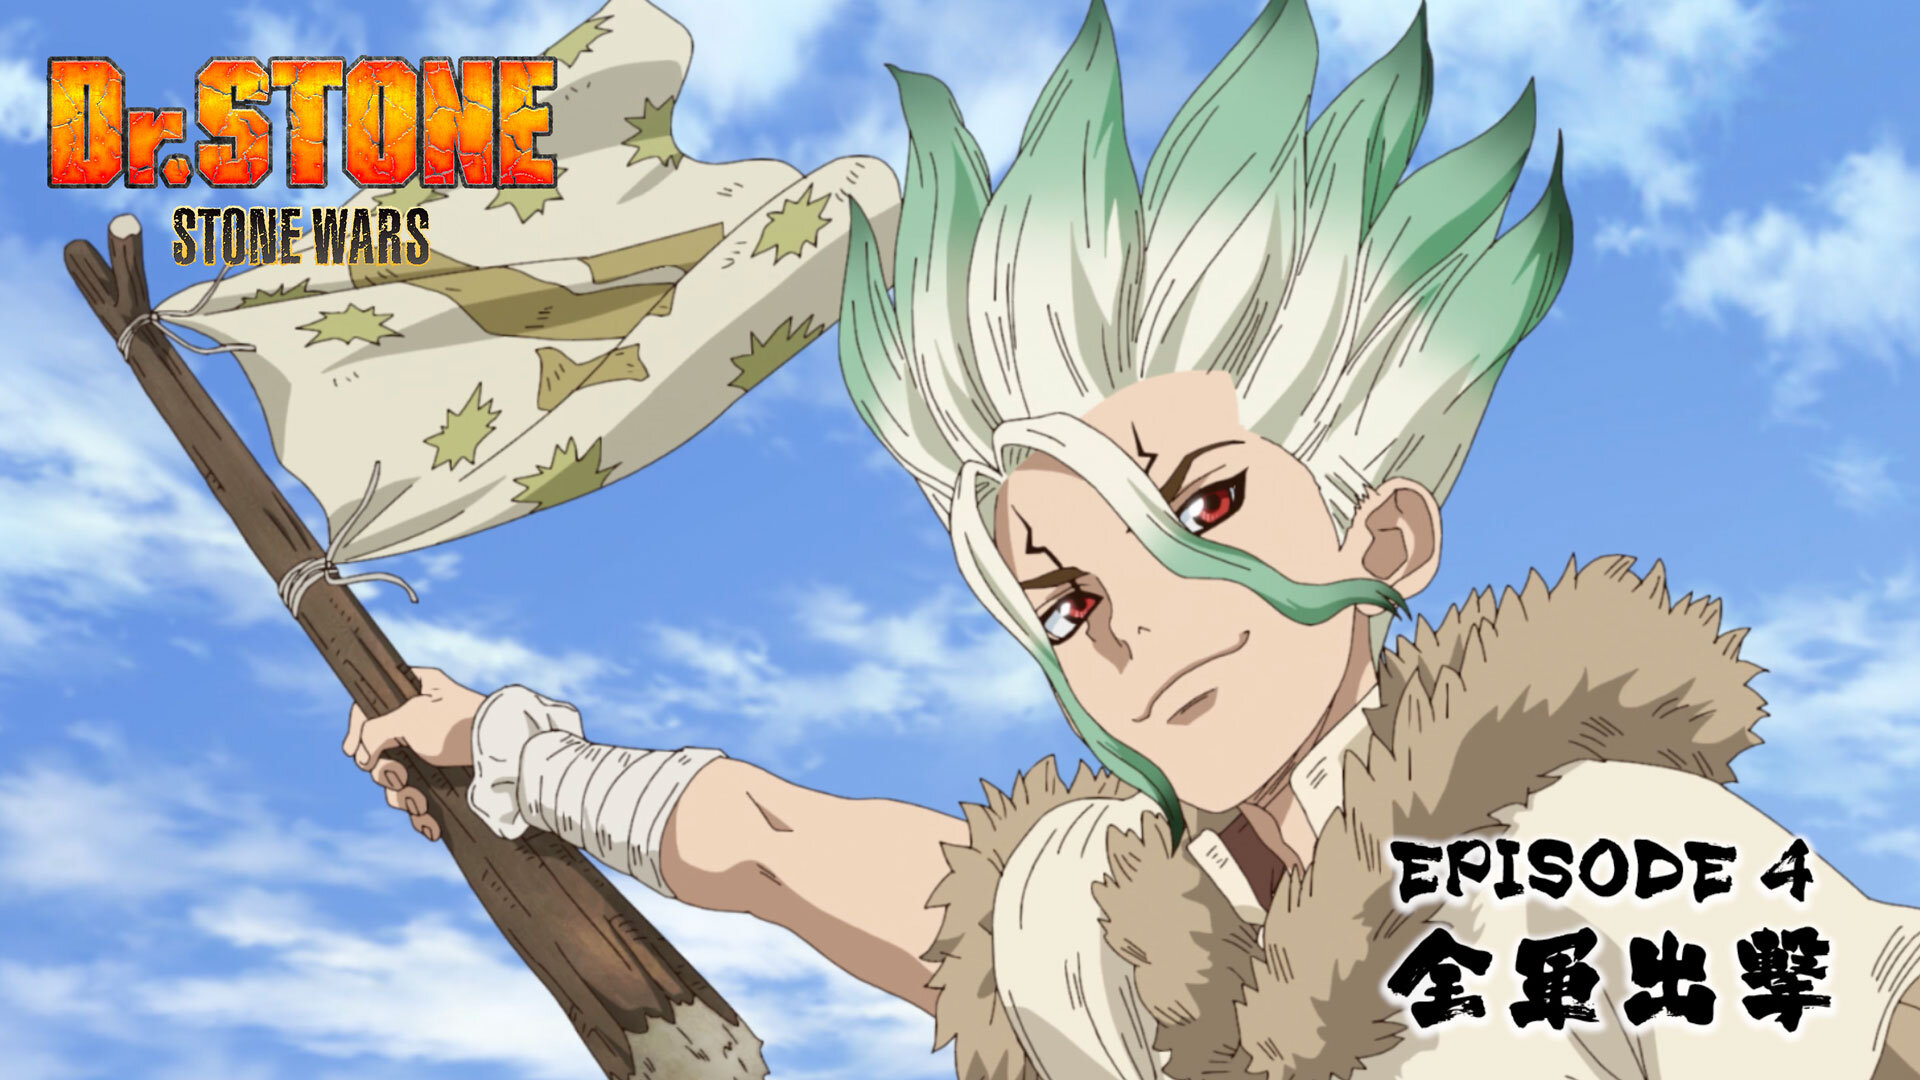 Dr Stone Stone Wars Episode 4 Streaming Now Tms Entertainment Anime You Love